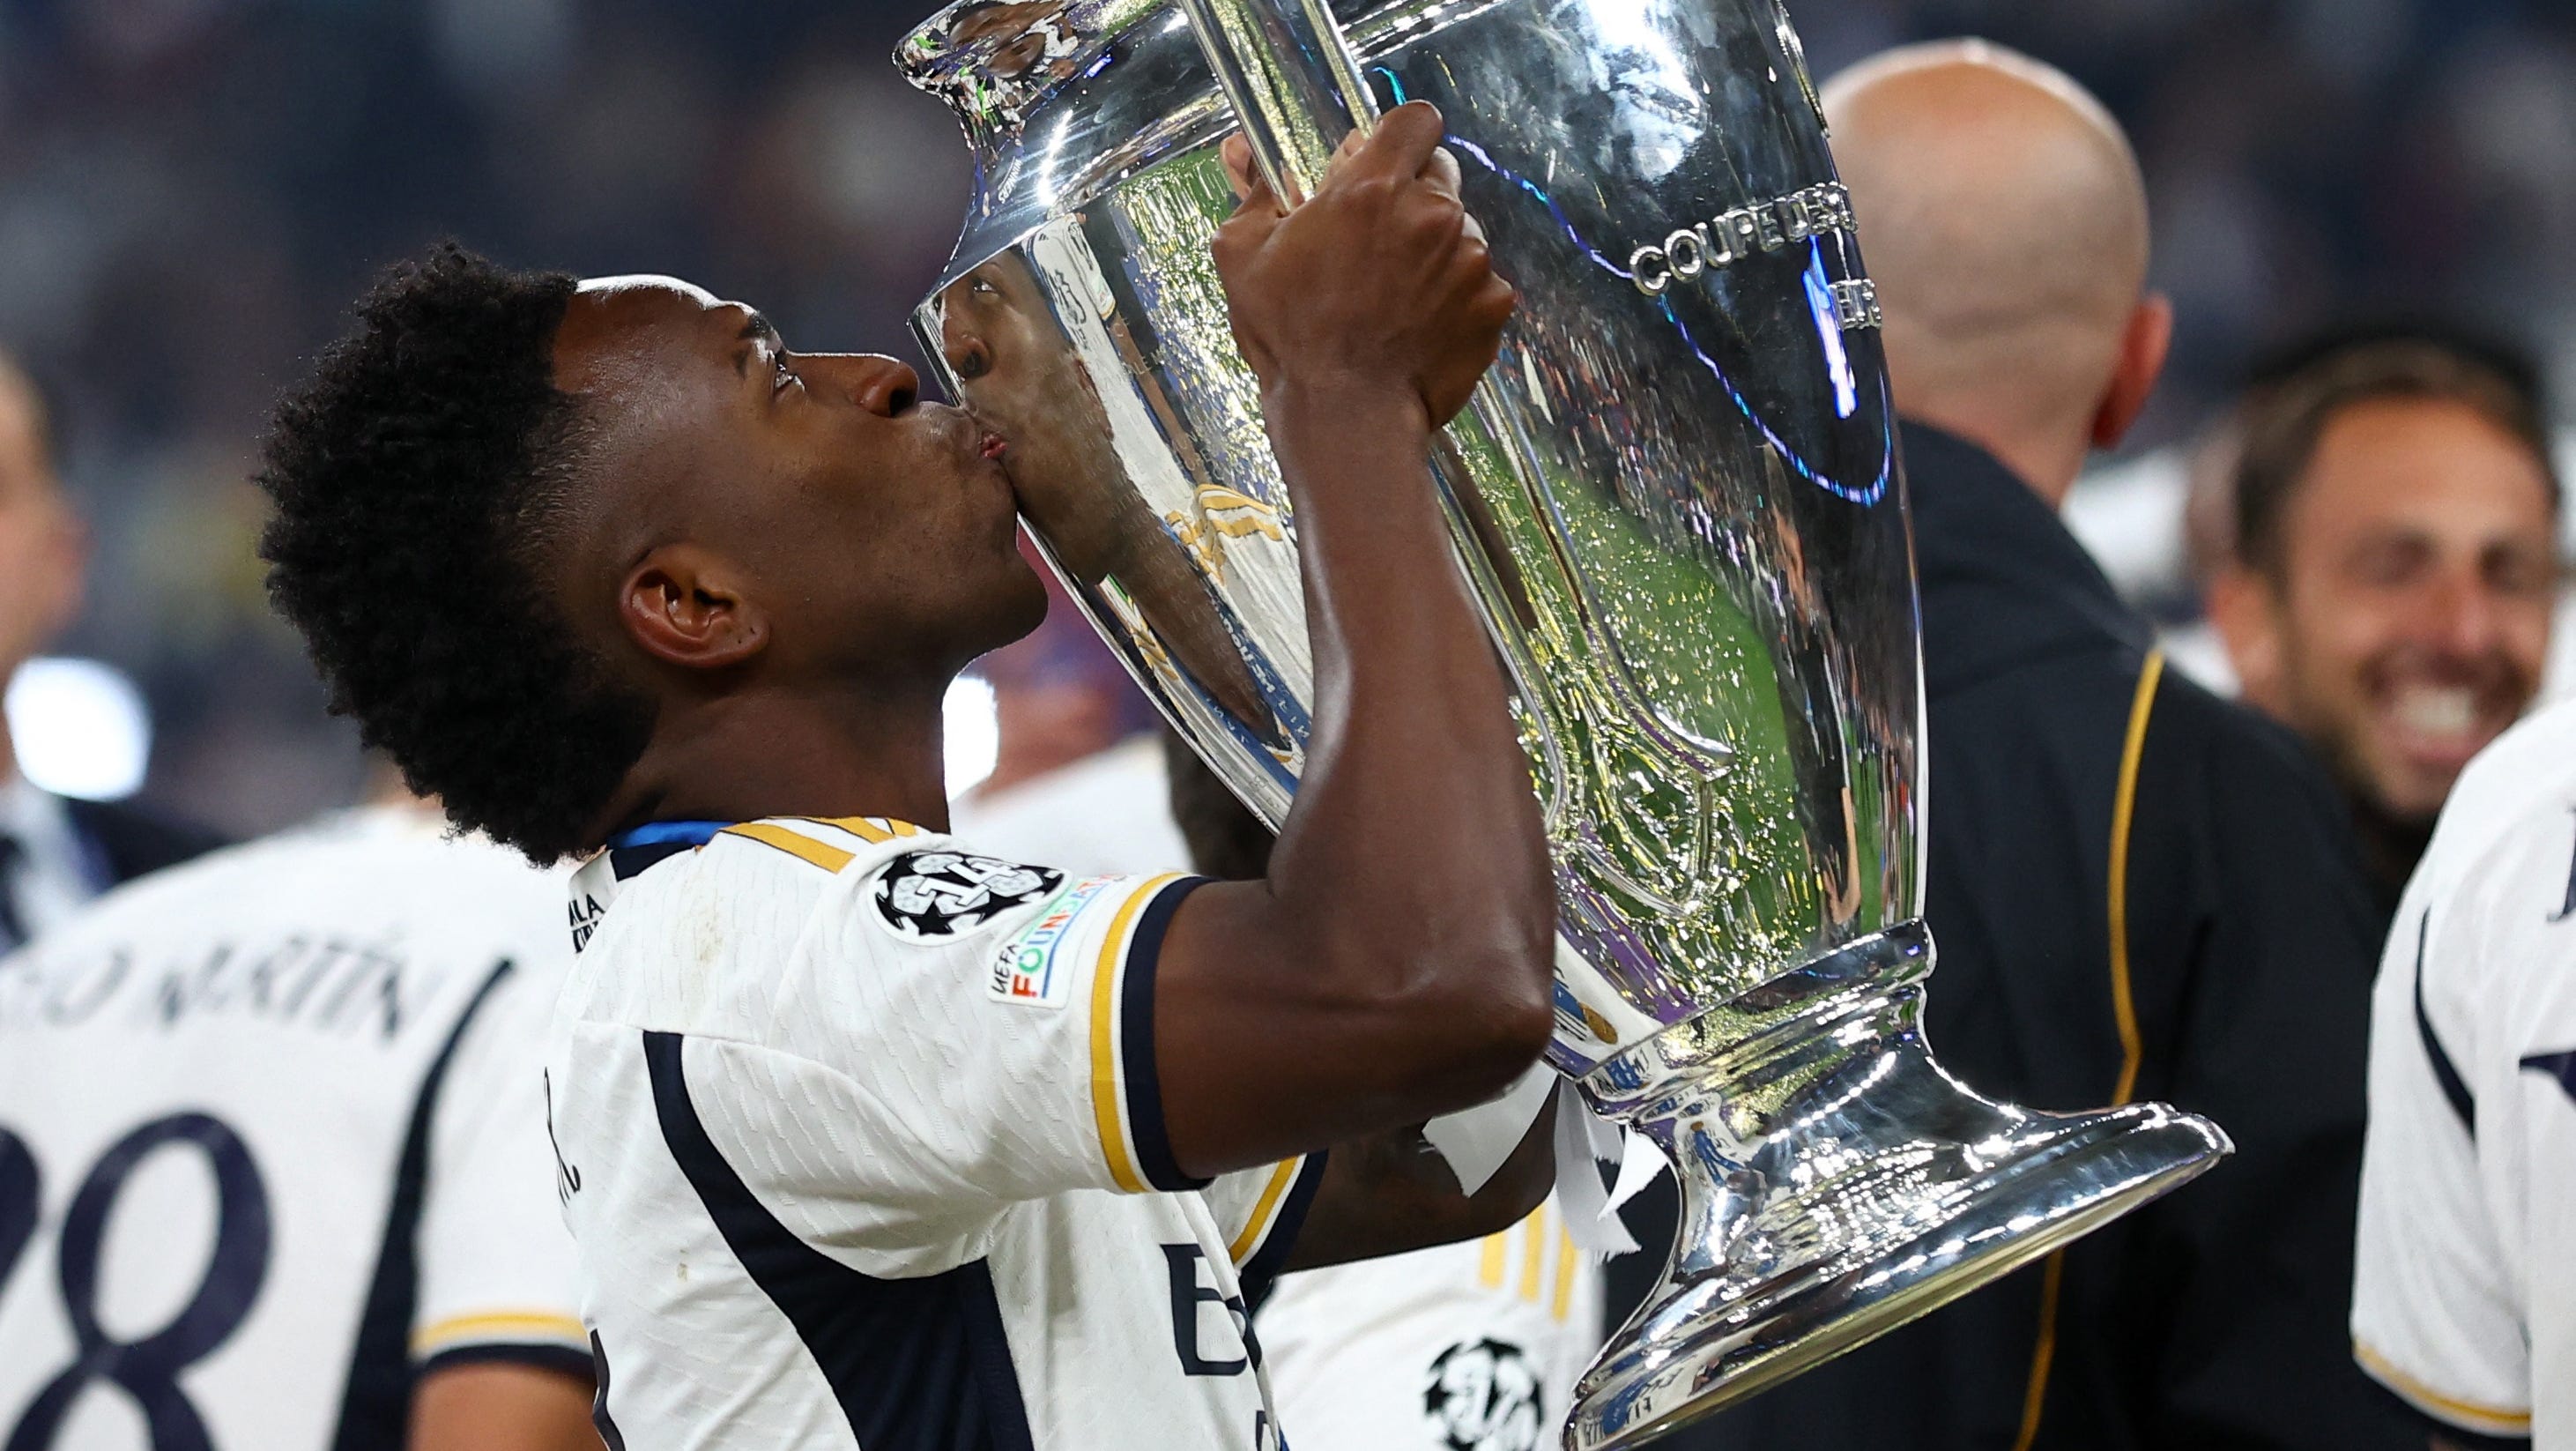 Champions League final highlights: Real Madrid beats Dortmund to win 15th European crown